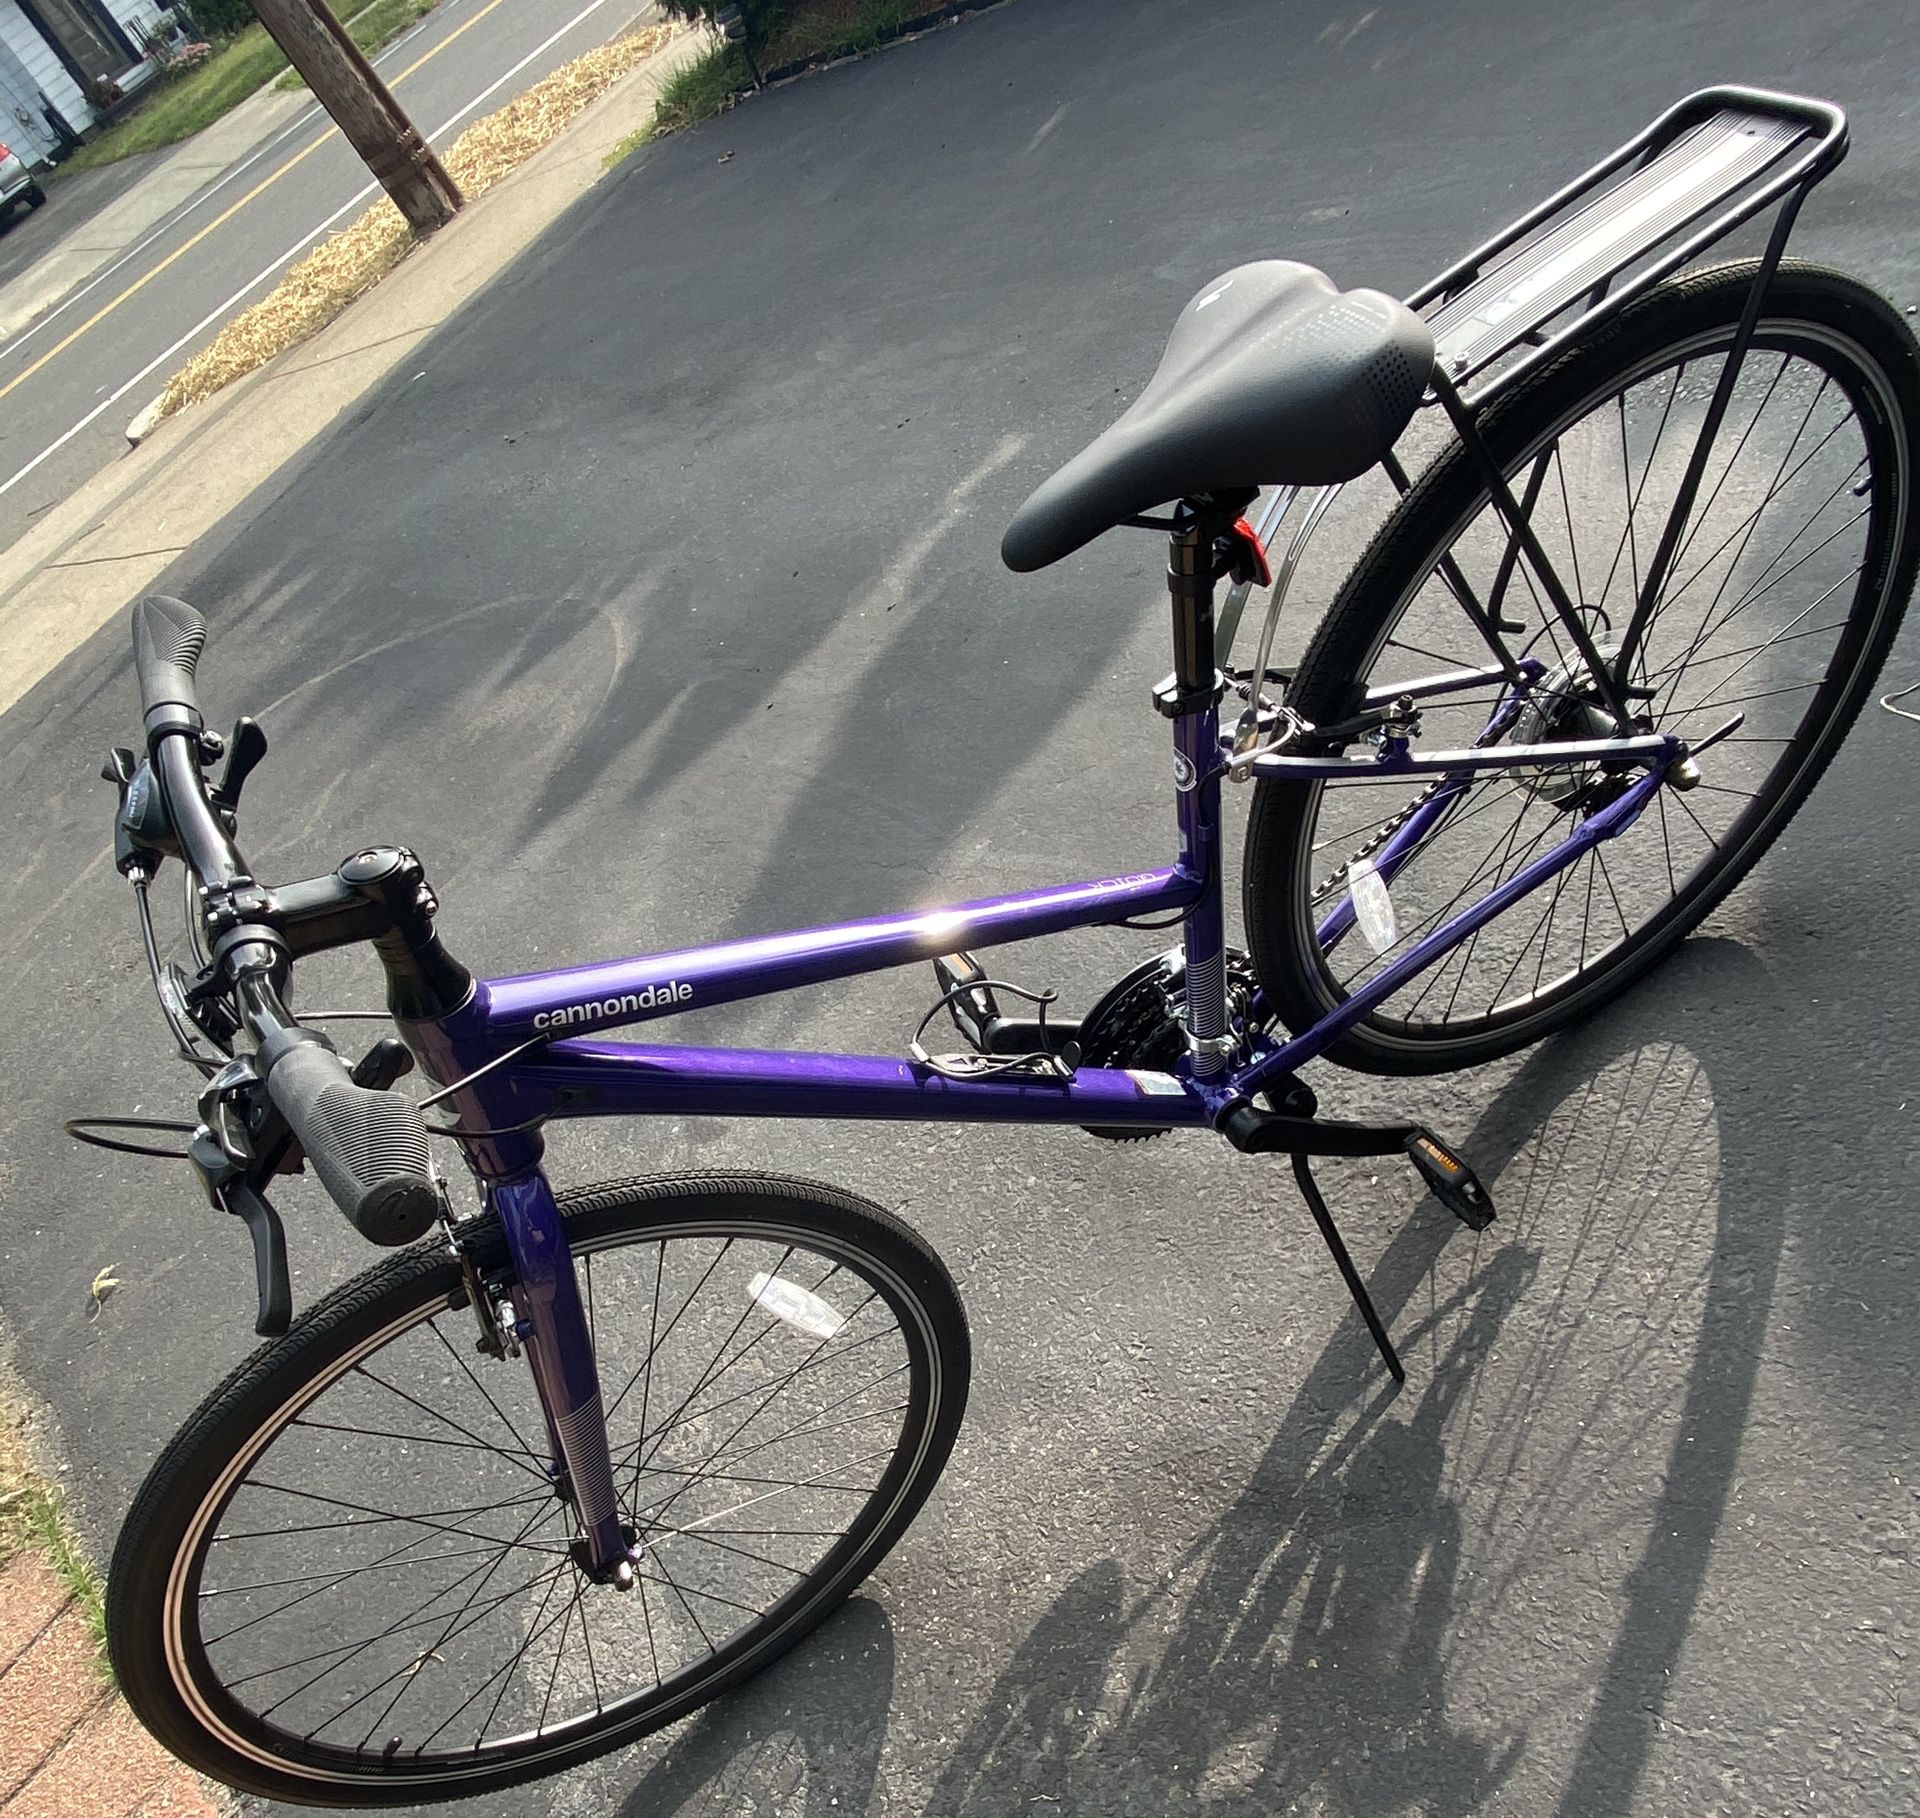 Brand new hybrid bike for sale Cannondale quick 6 retails for over $500